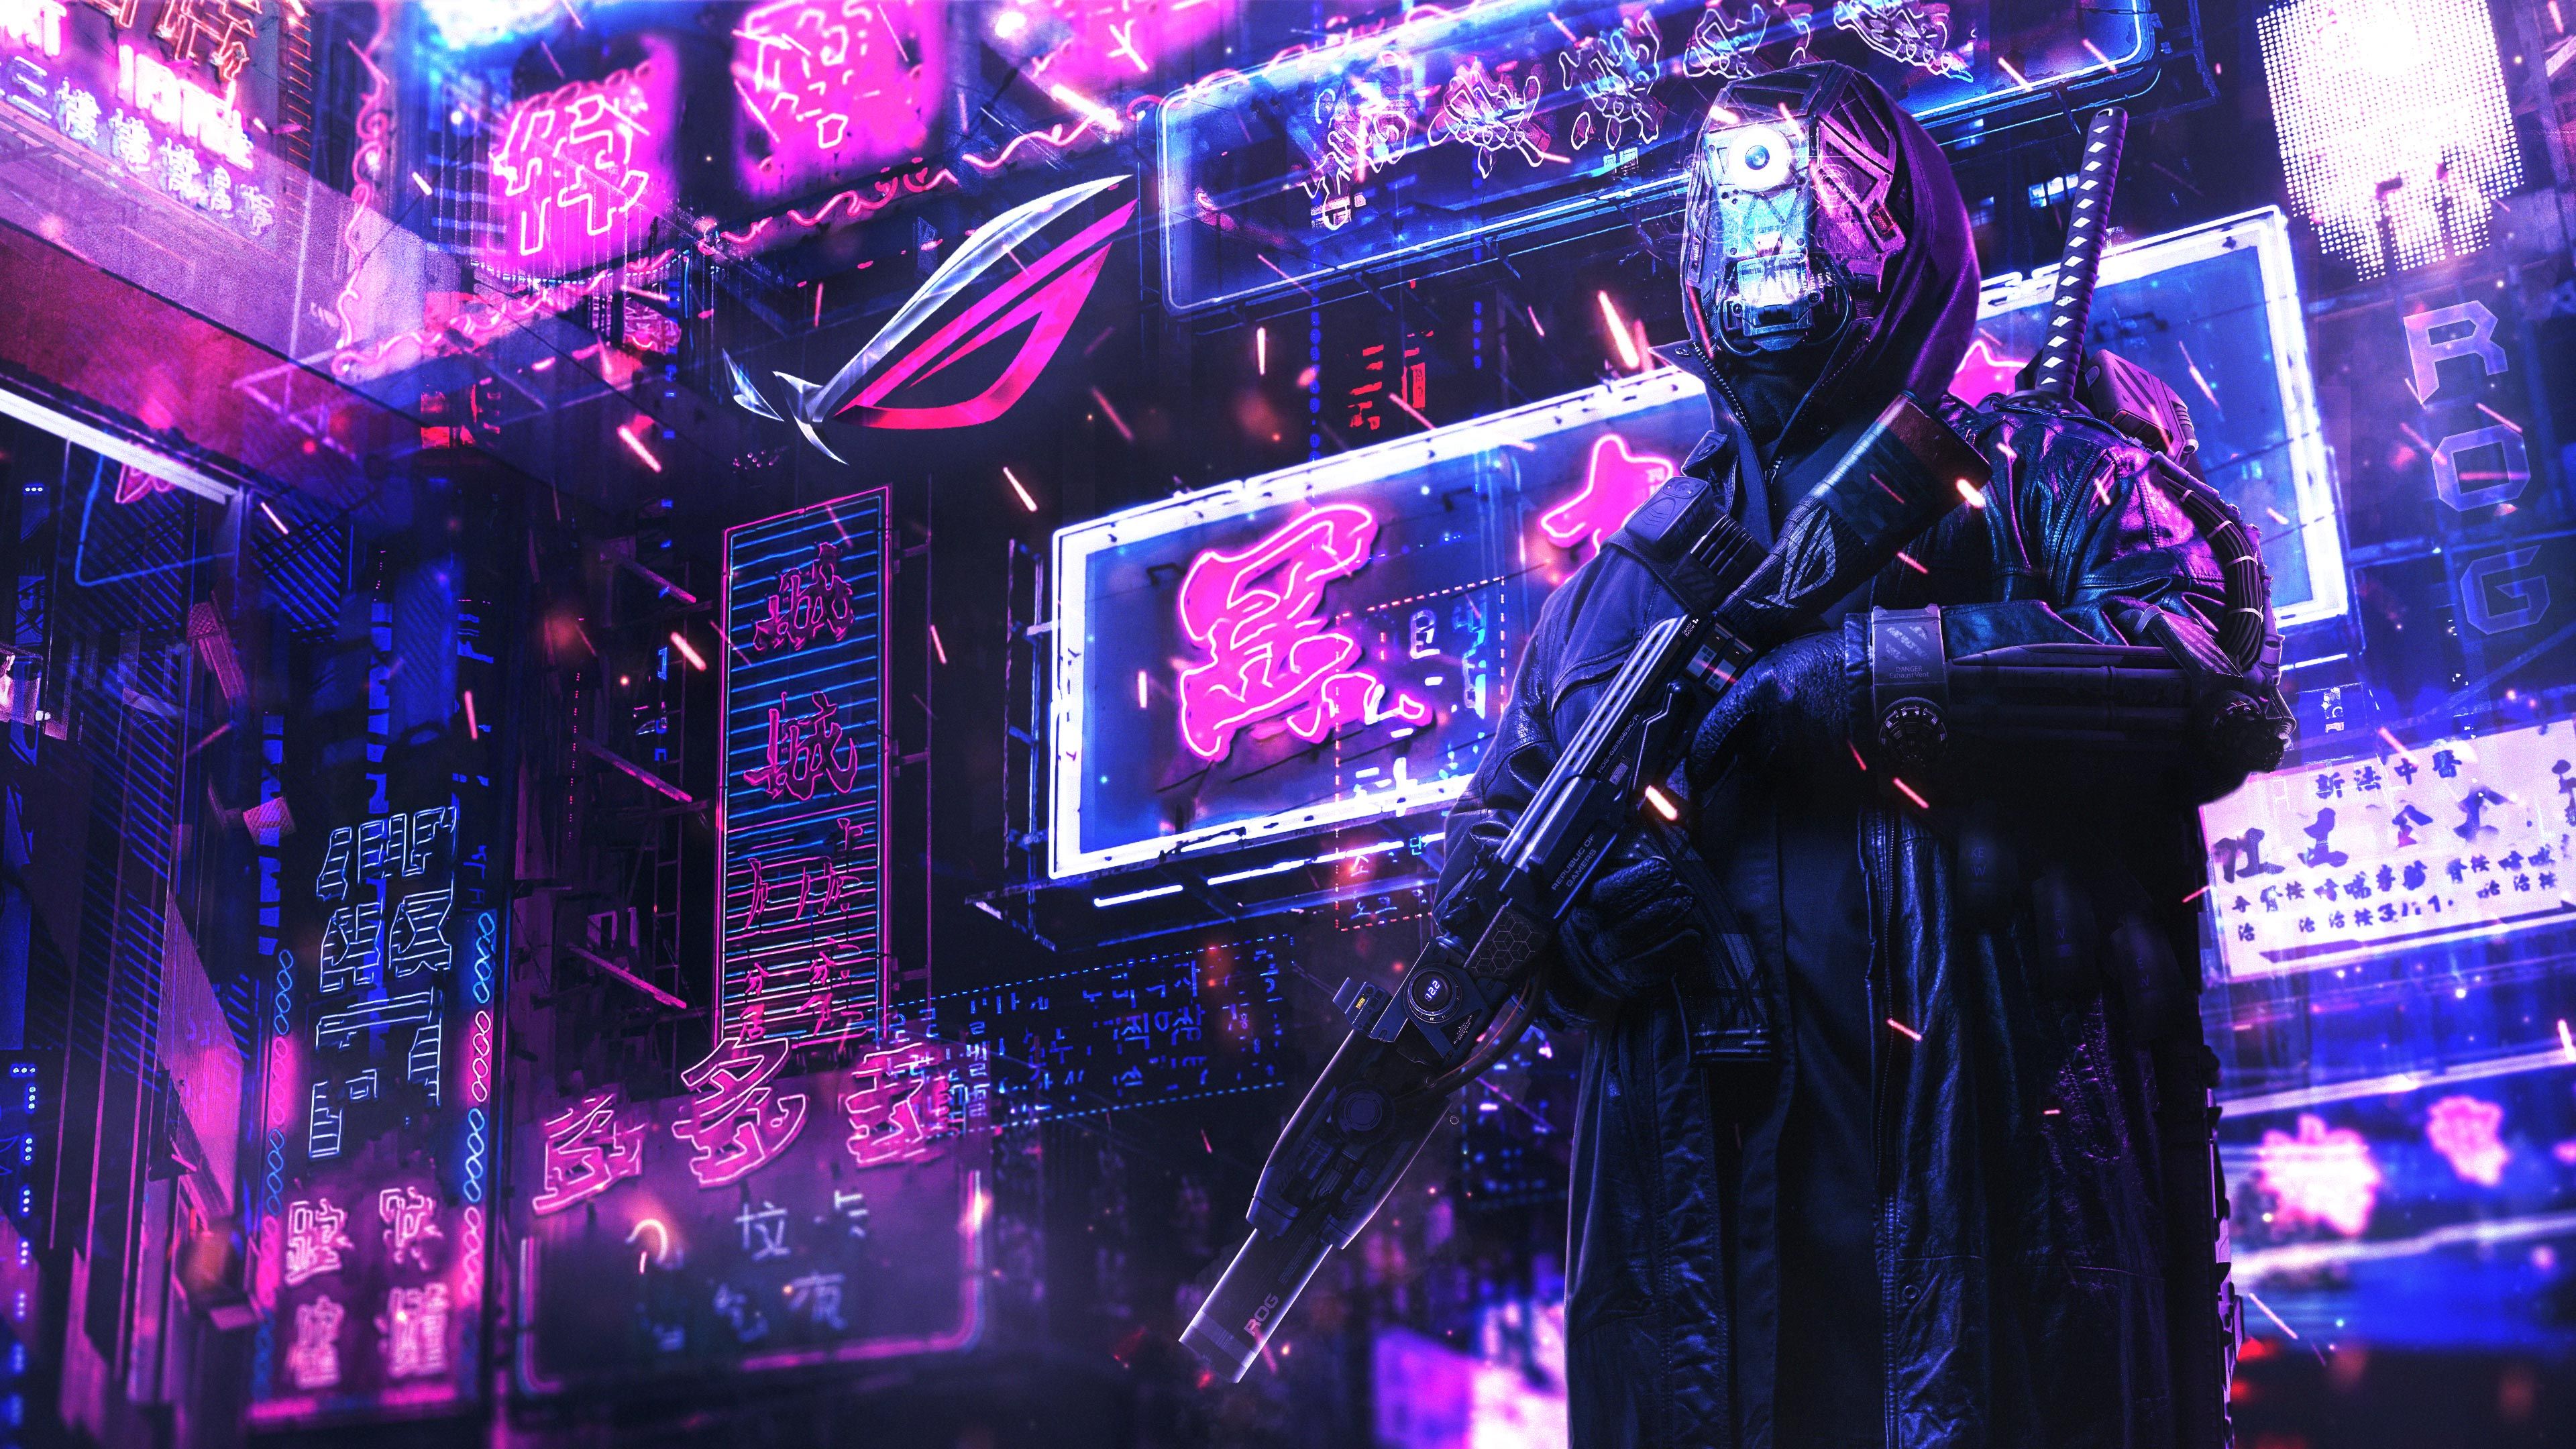 Cyberpunk 4K wallpapers for your desktop or mobile screen free and easy to download